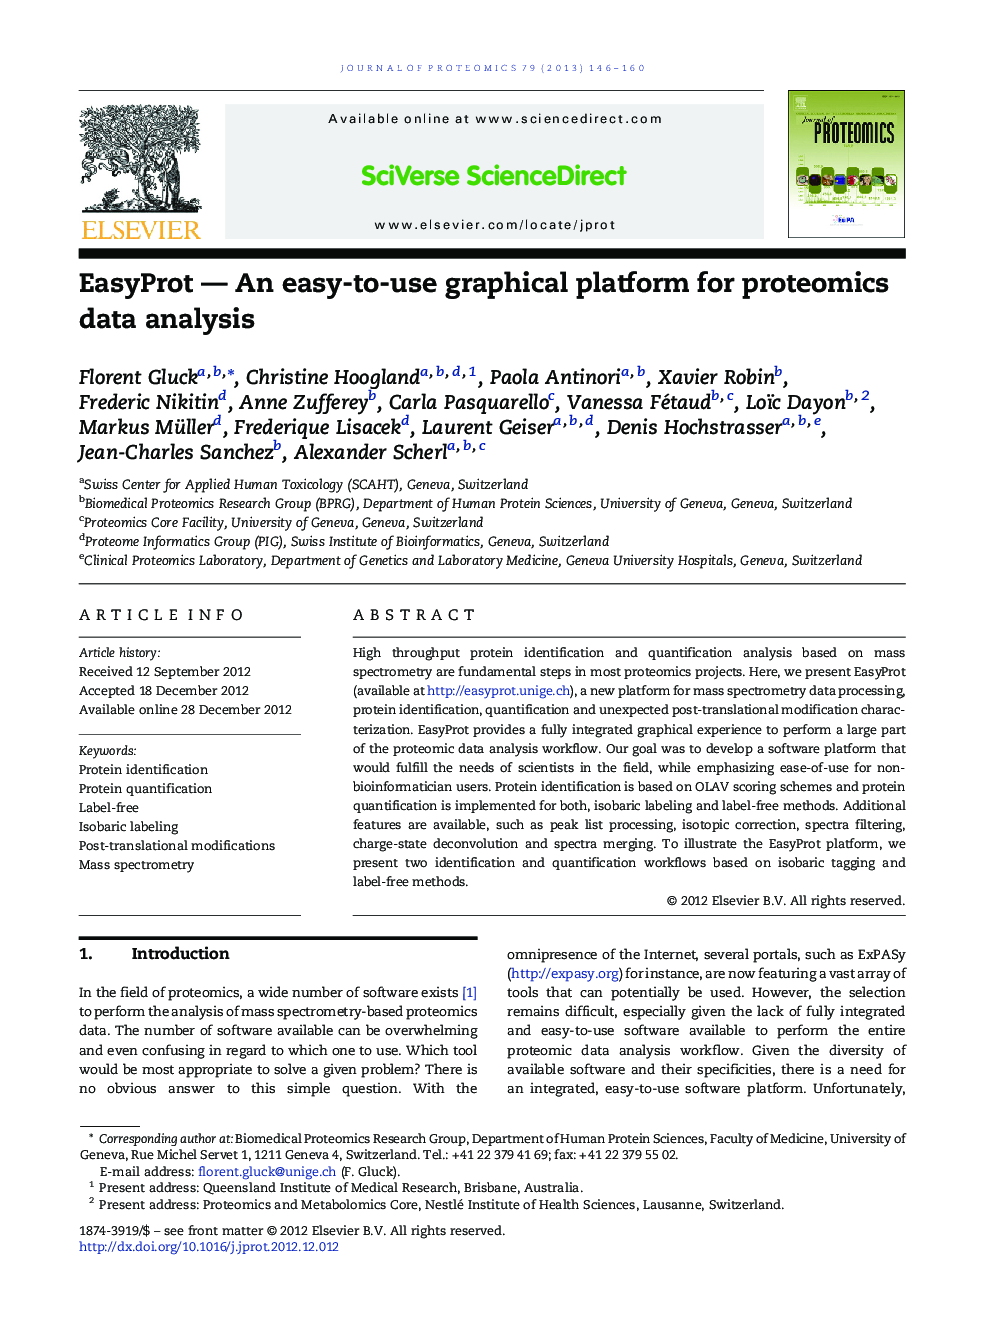 EasyProt - An easy-to-use graphical platform for proteomics data analysis